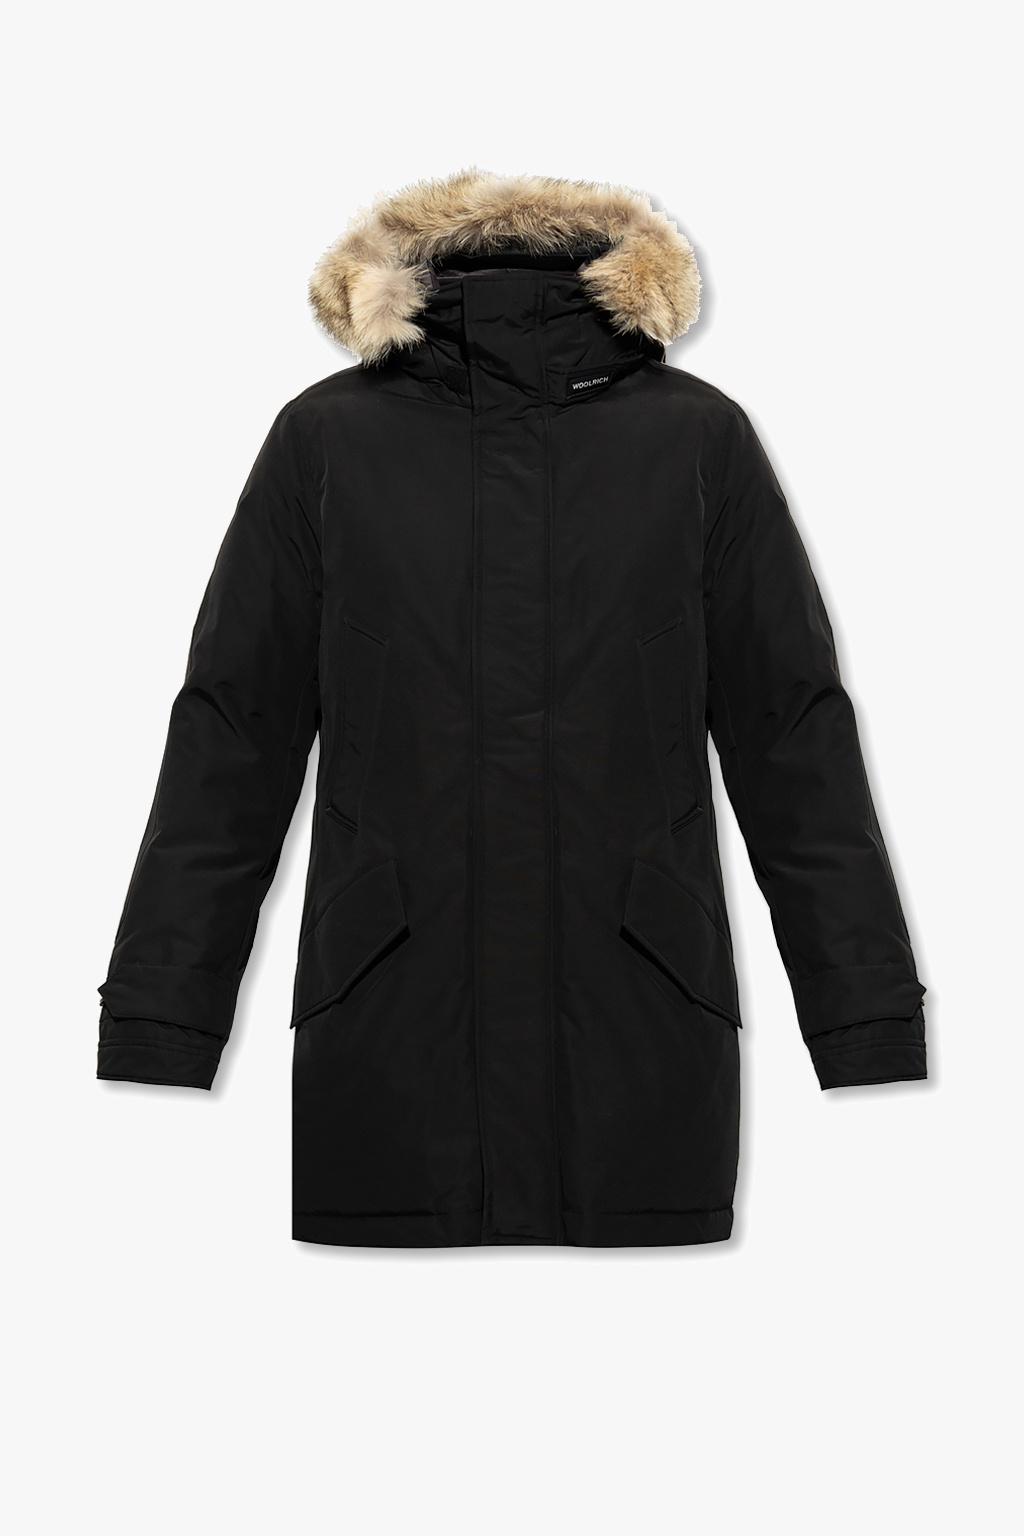 Antagonisme Gering zonsondergang IetpShops Morocco - Black Hooded down jacket Finamore Woolrich -  polo-shirts Silver robes caps 6 shoe-care Sweatpants